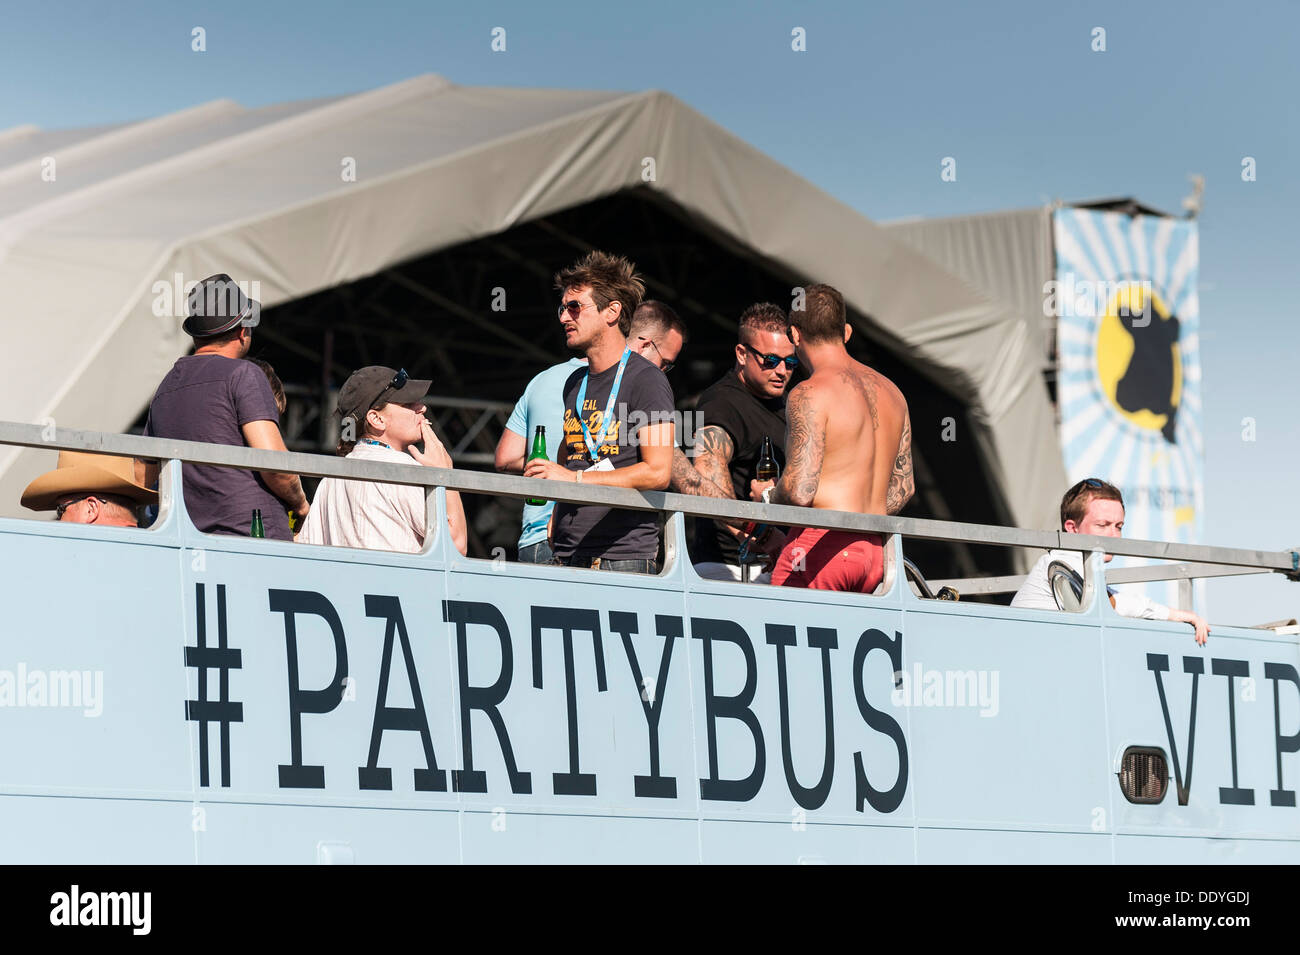 The VIP party bus at the Brownstock Festival in Essex. Stock Photo